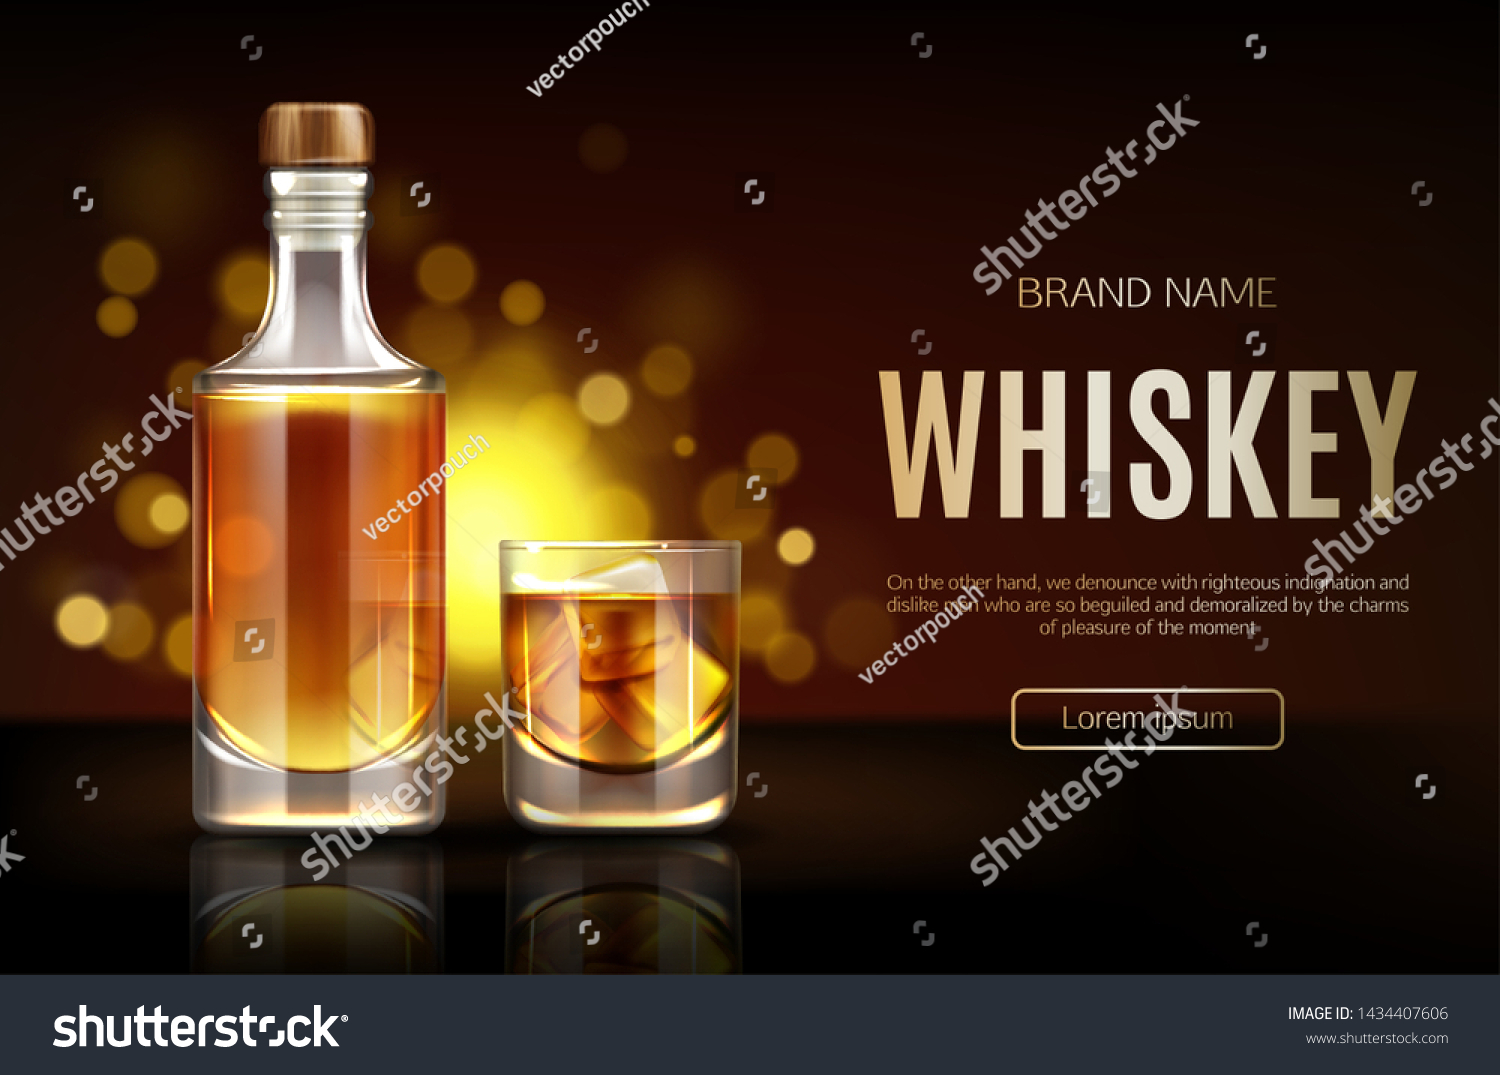 Download Whiskey Bottle Glass Mockup Closed Blank Stock Vector Royalty Free 1434407606